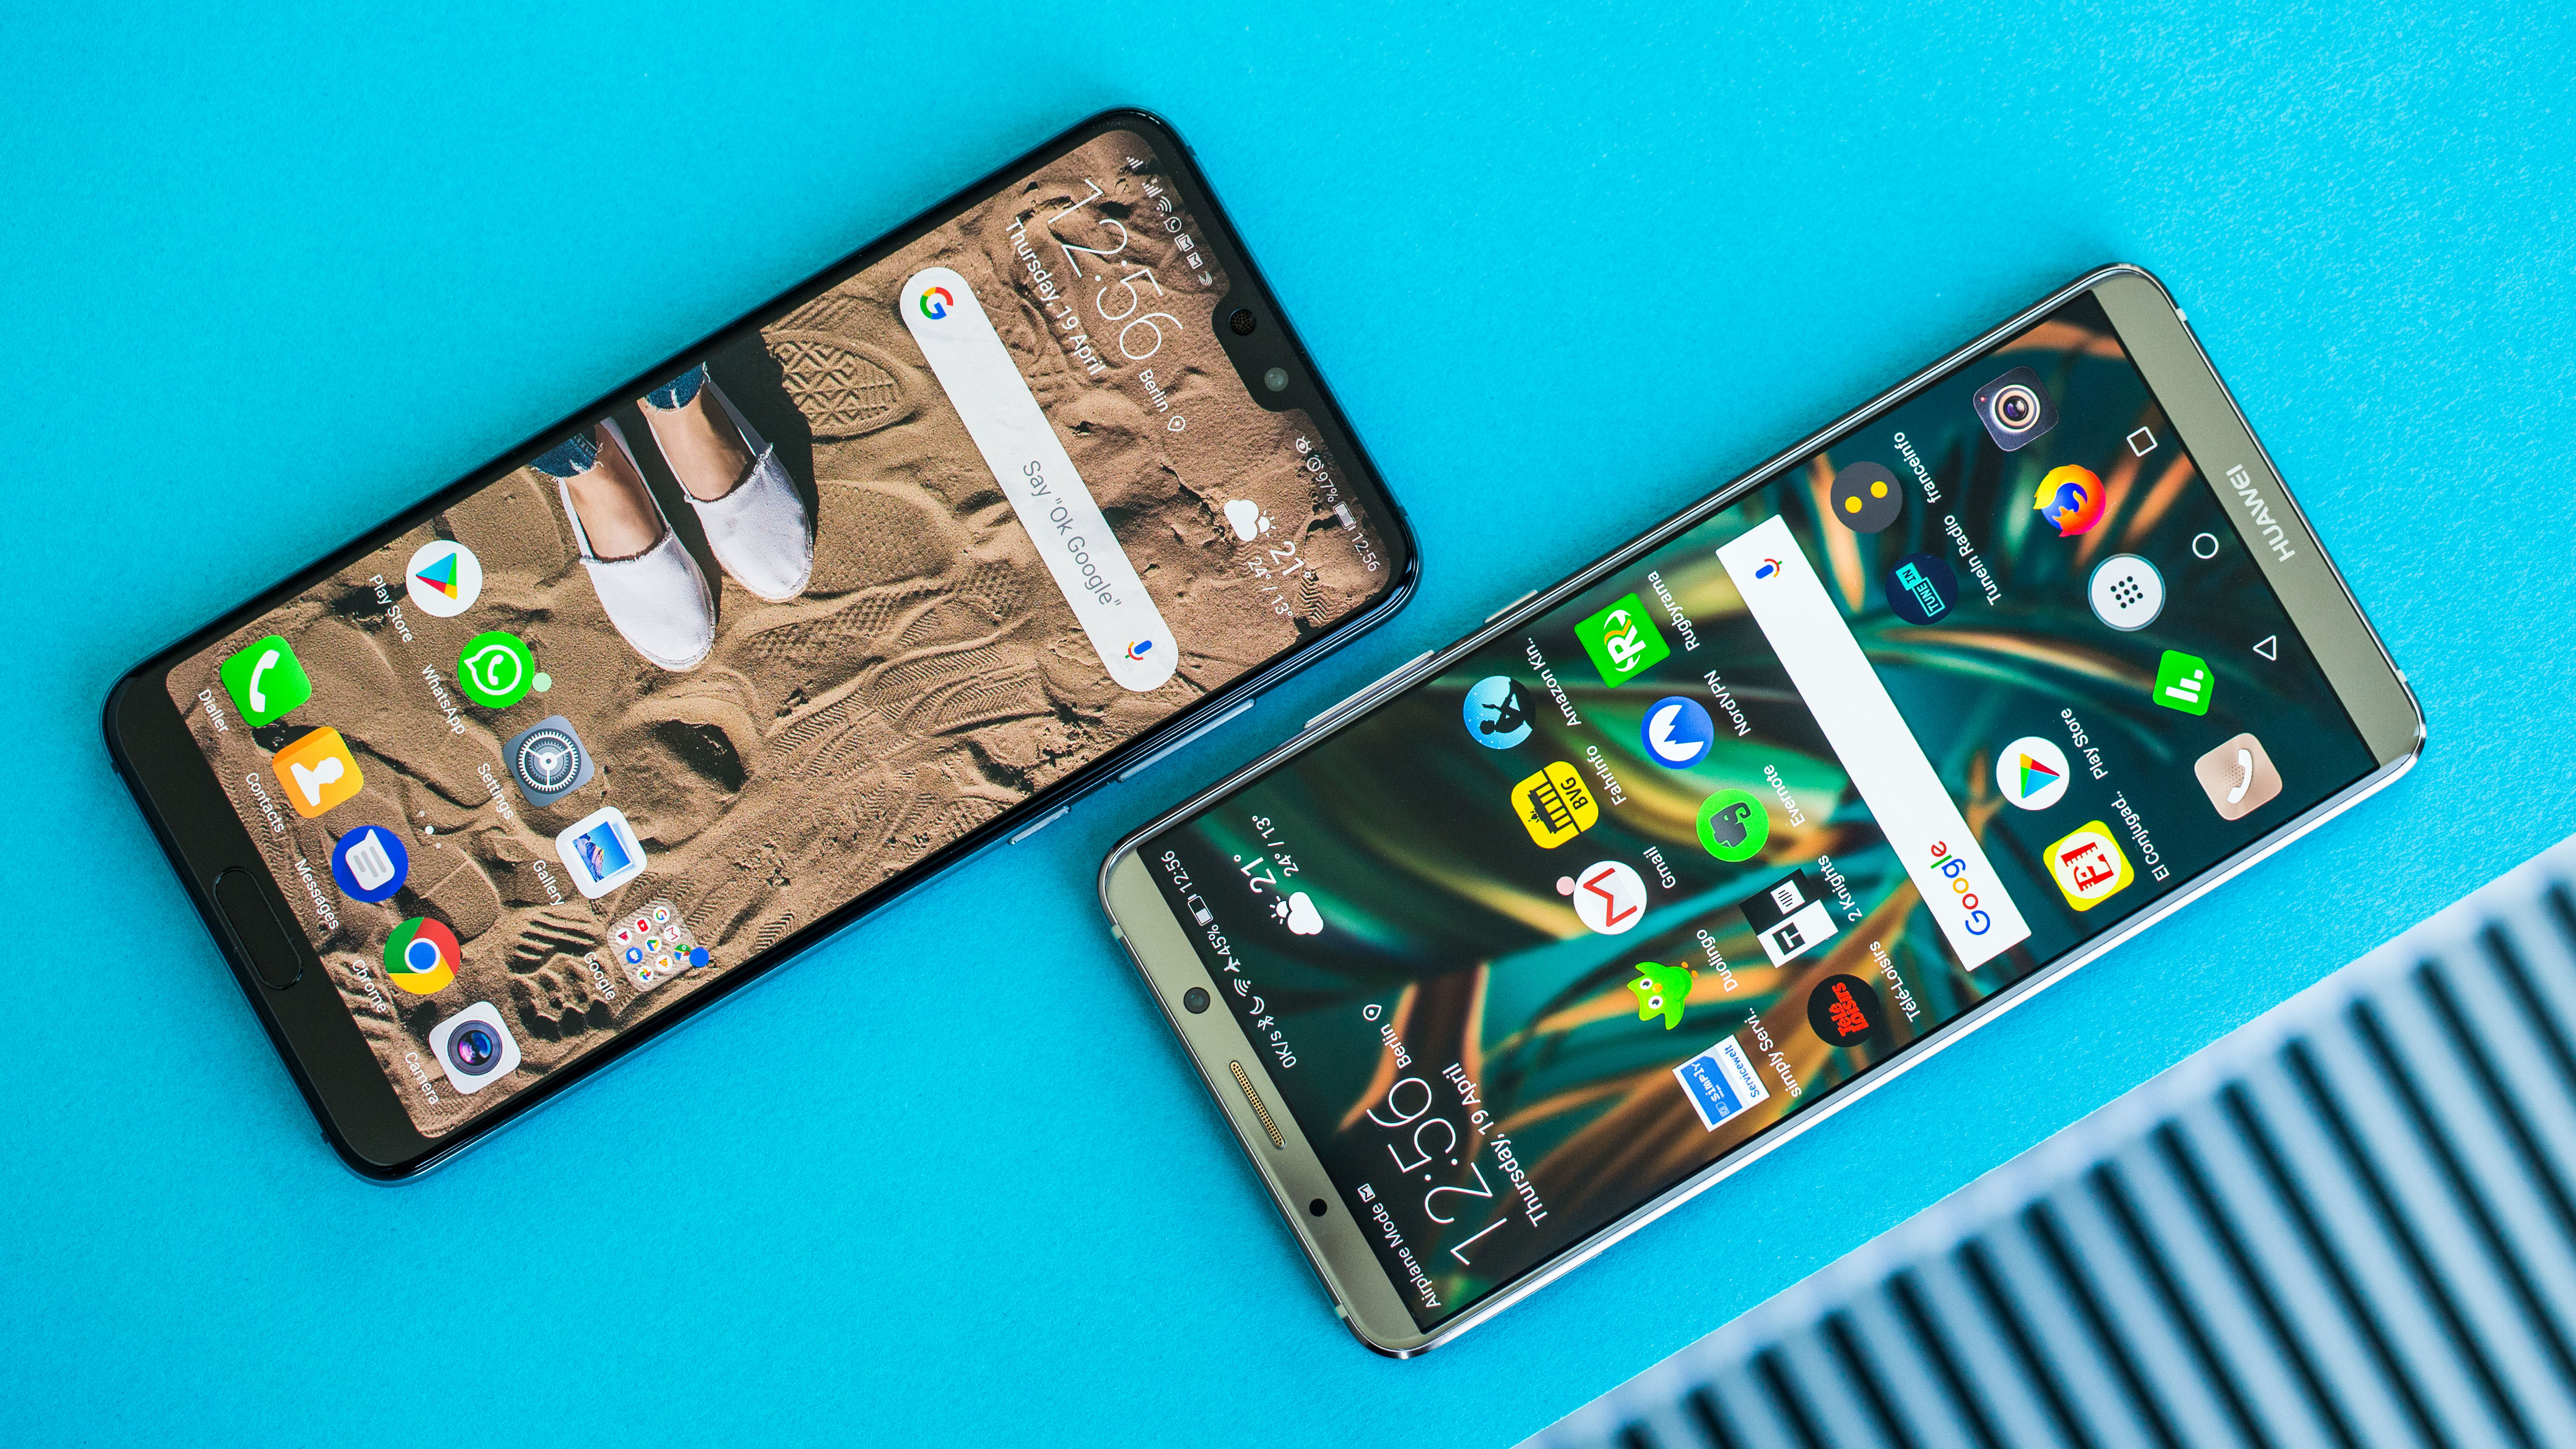 Sentimenteel Mis beet P20 Pro vs Mate 10 Pro: who's the real head of the Huawei family? | NextPit